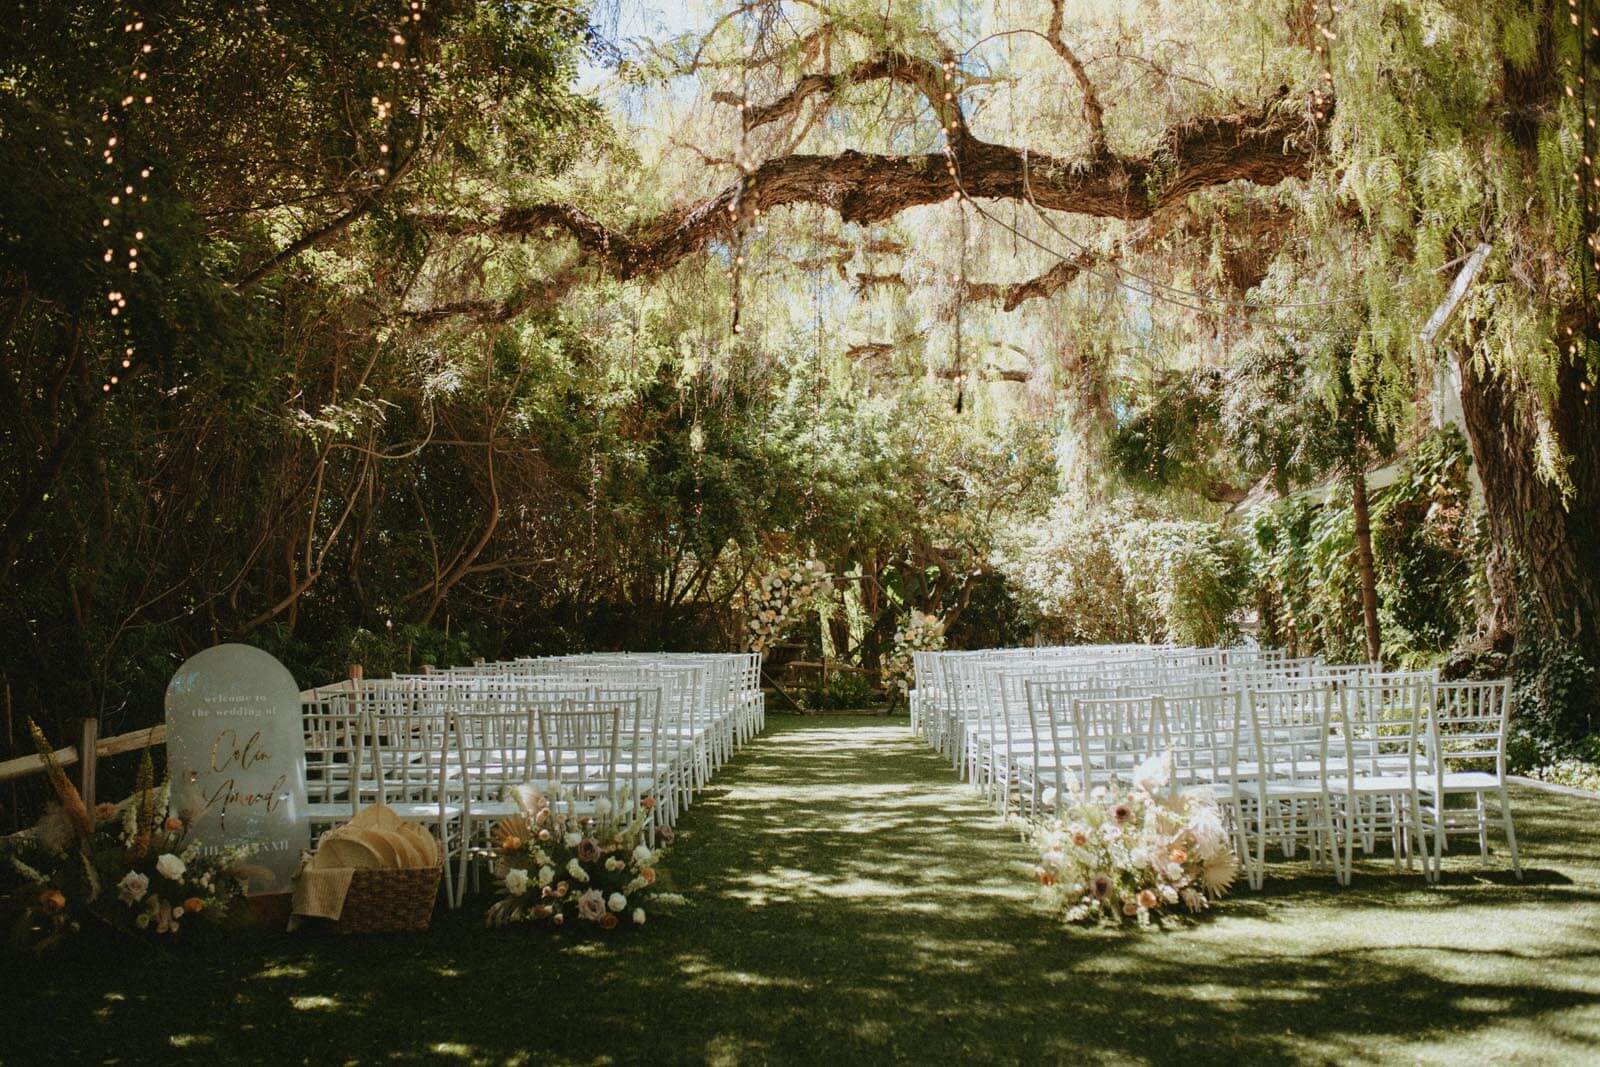 How to choose the right wedding venue for your wedding?